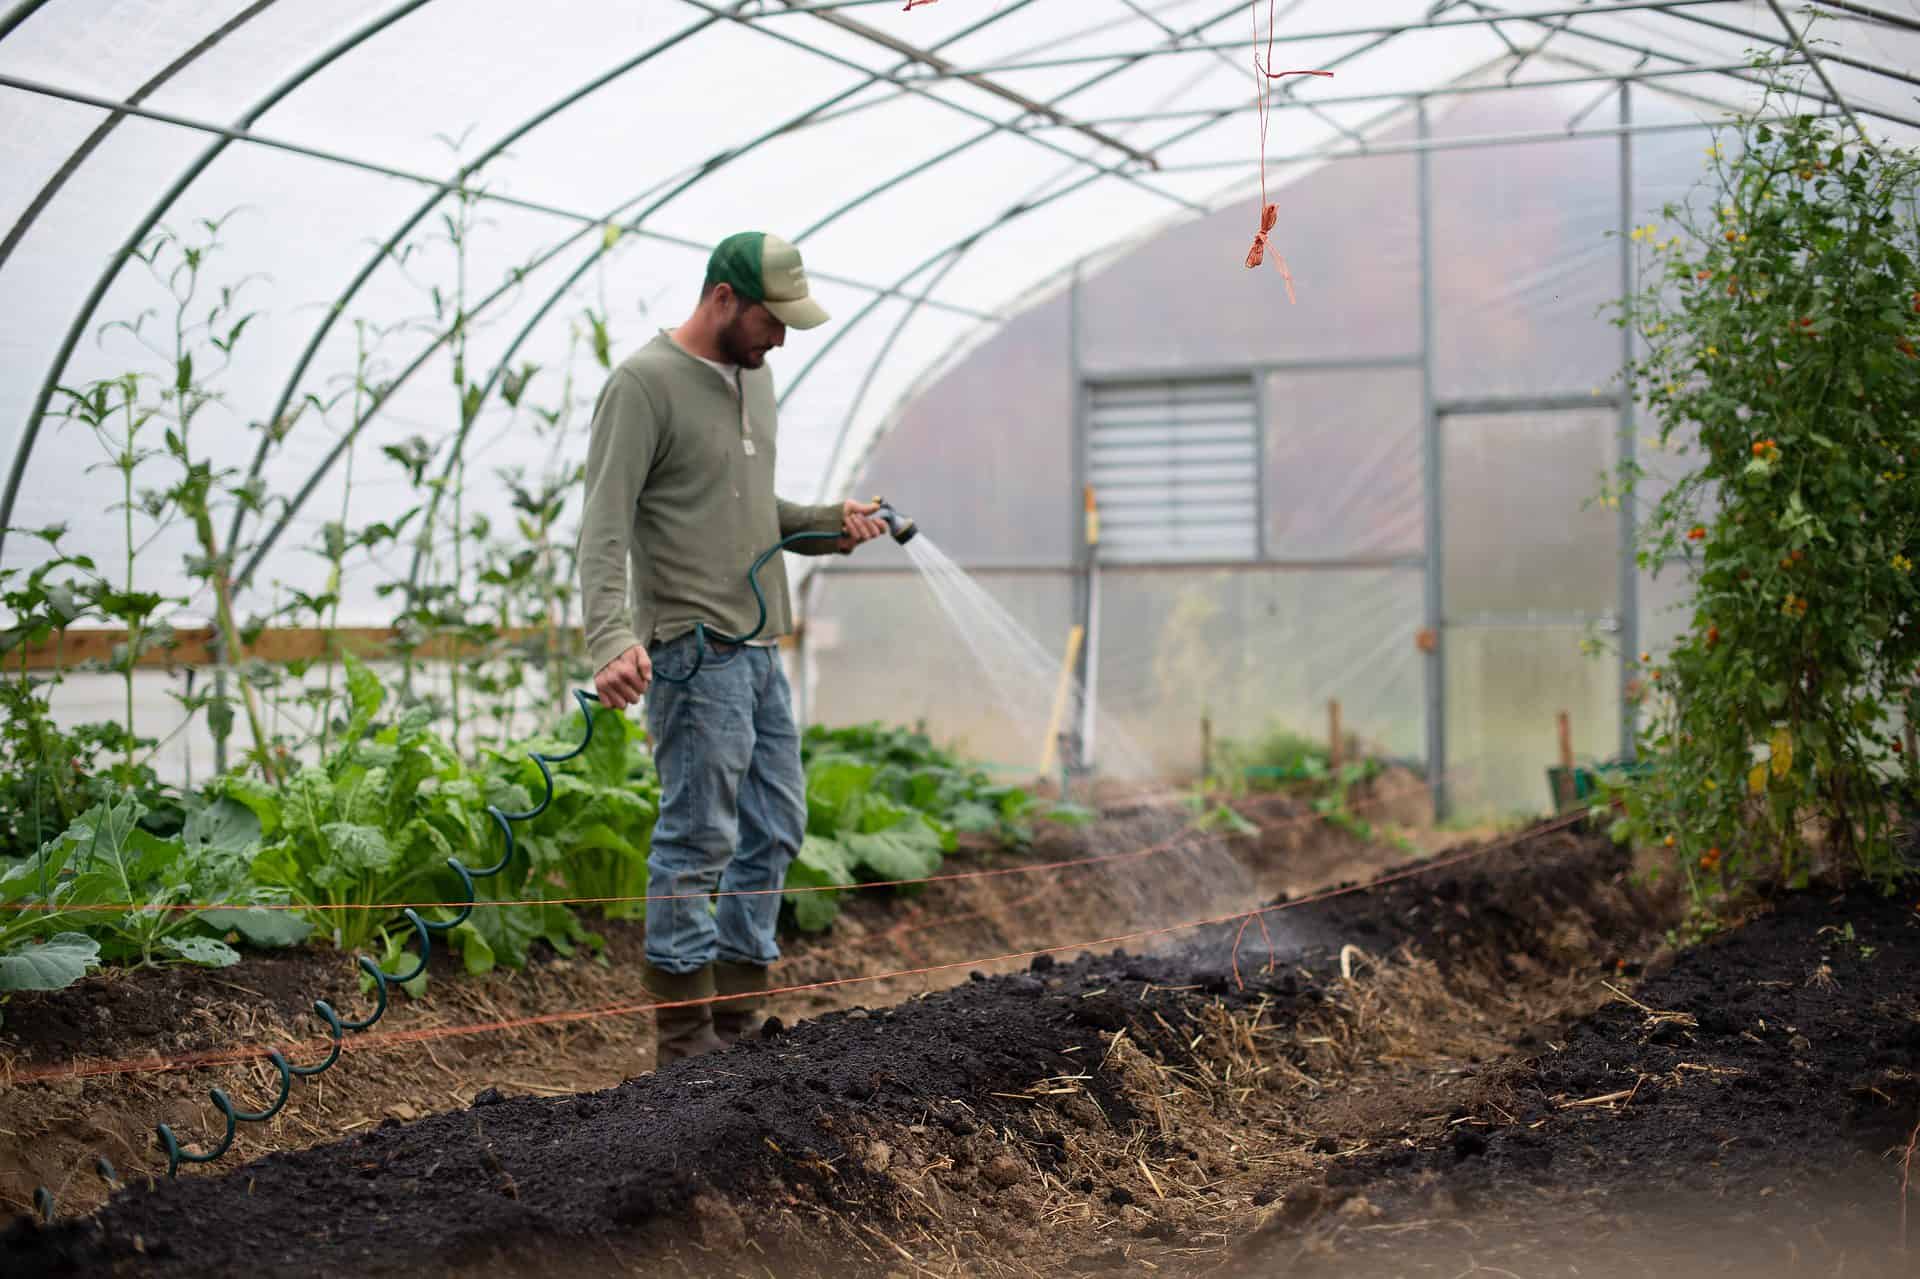 sowing seed in a greenhouse